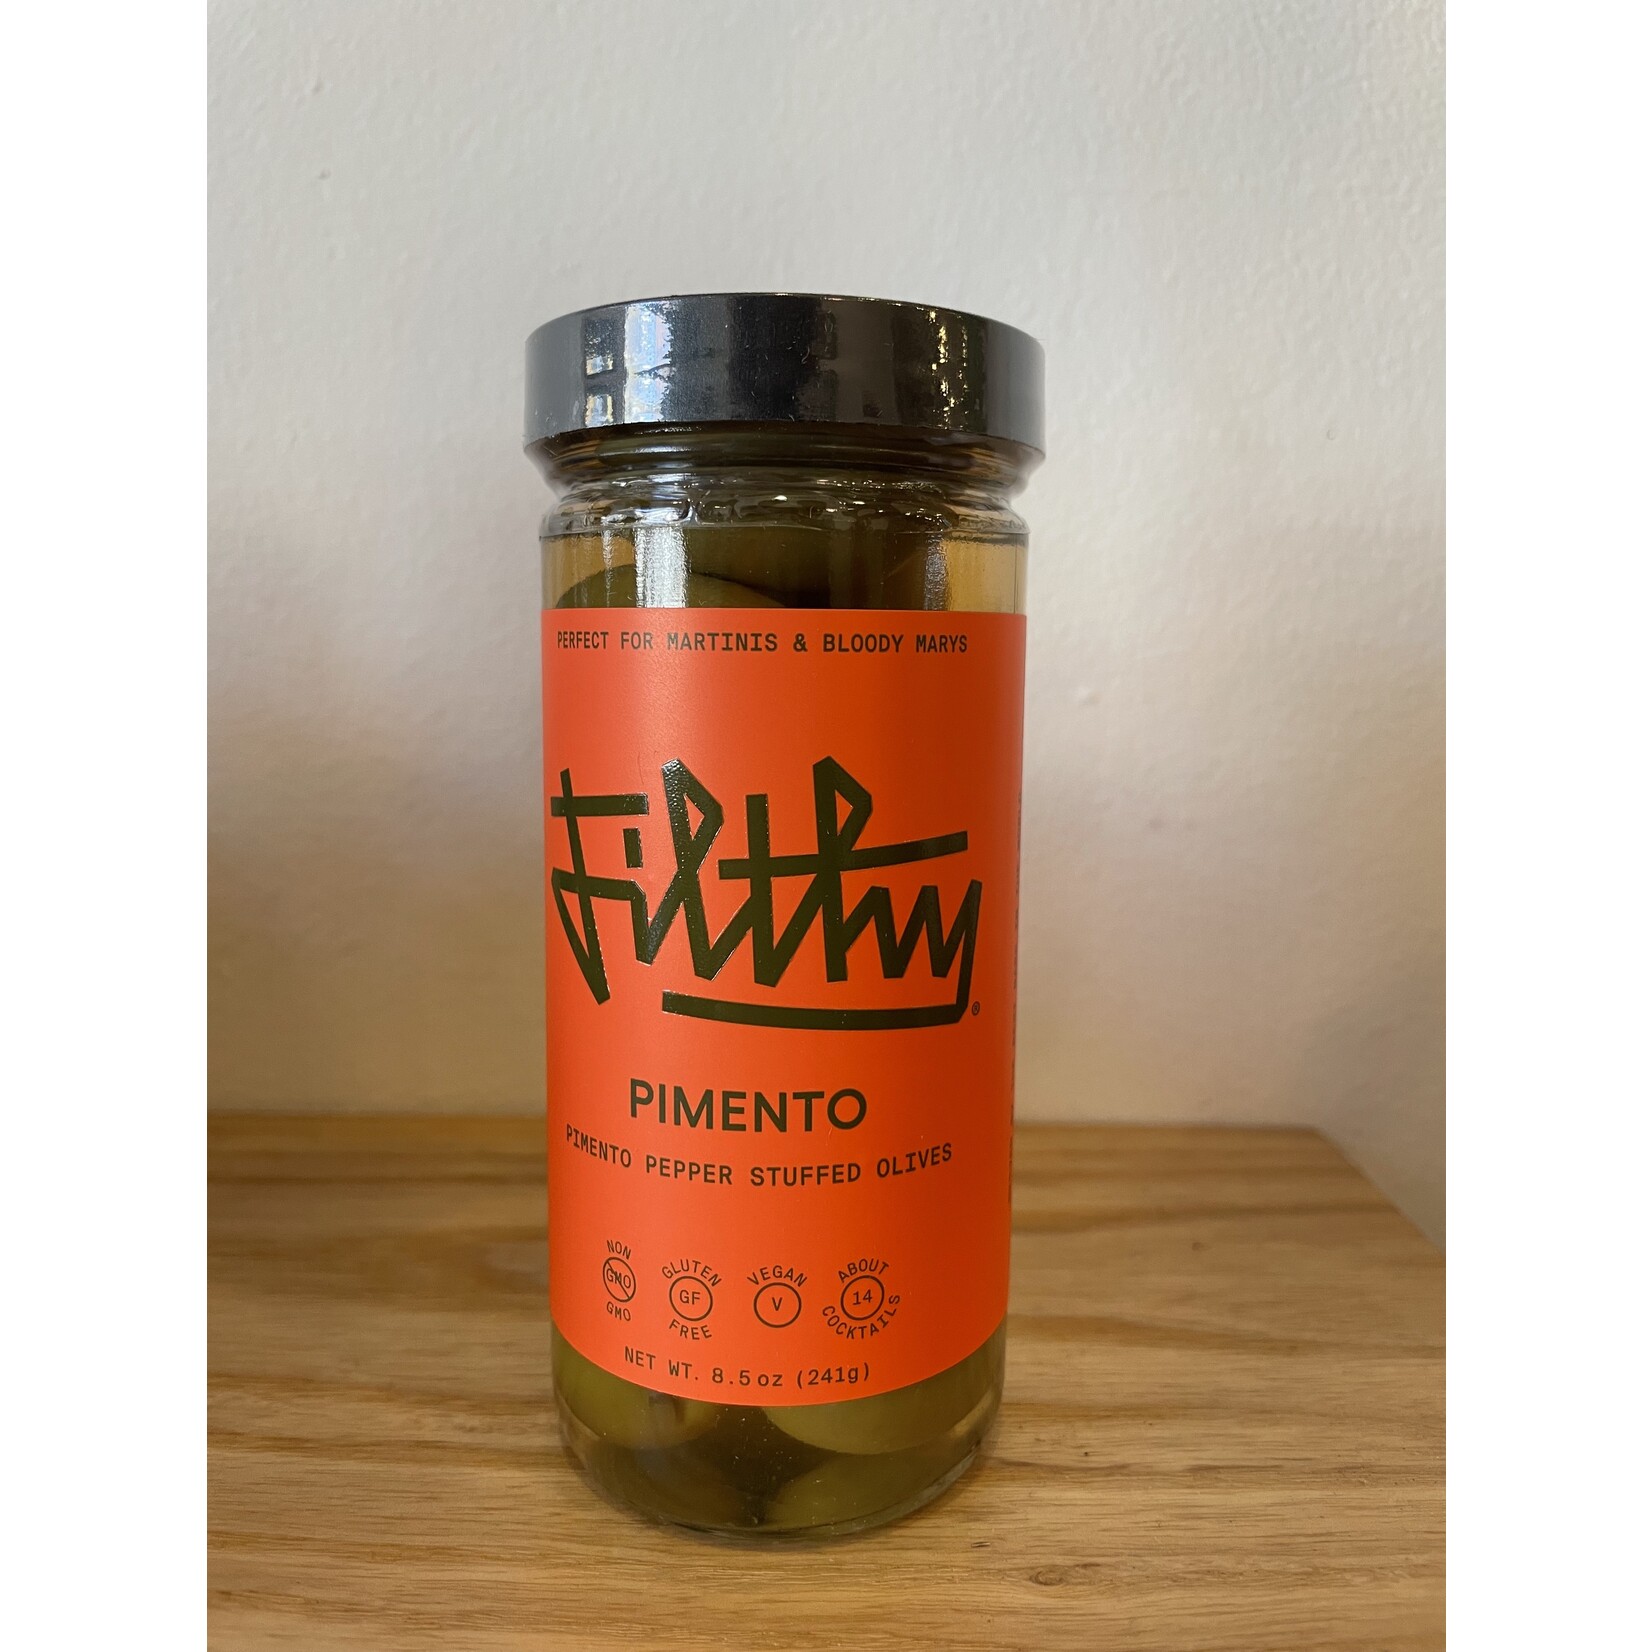 Filthy Filthy Pimento Stuffed Olives